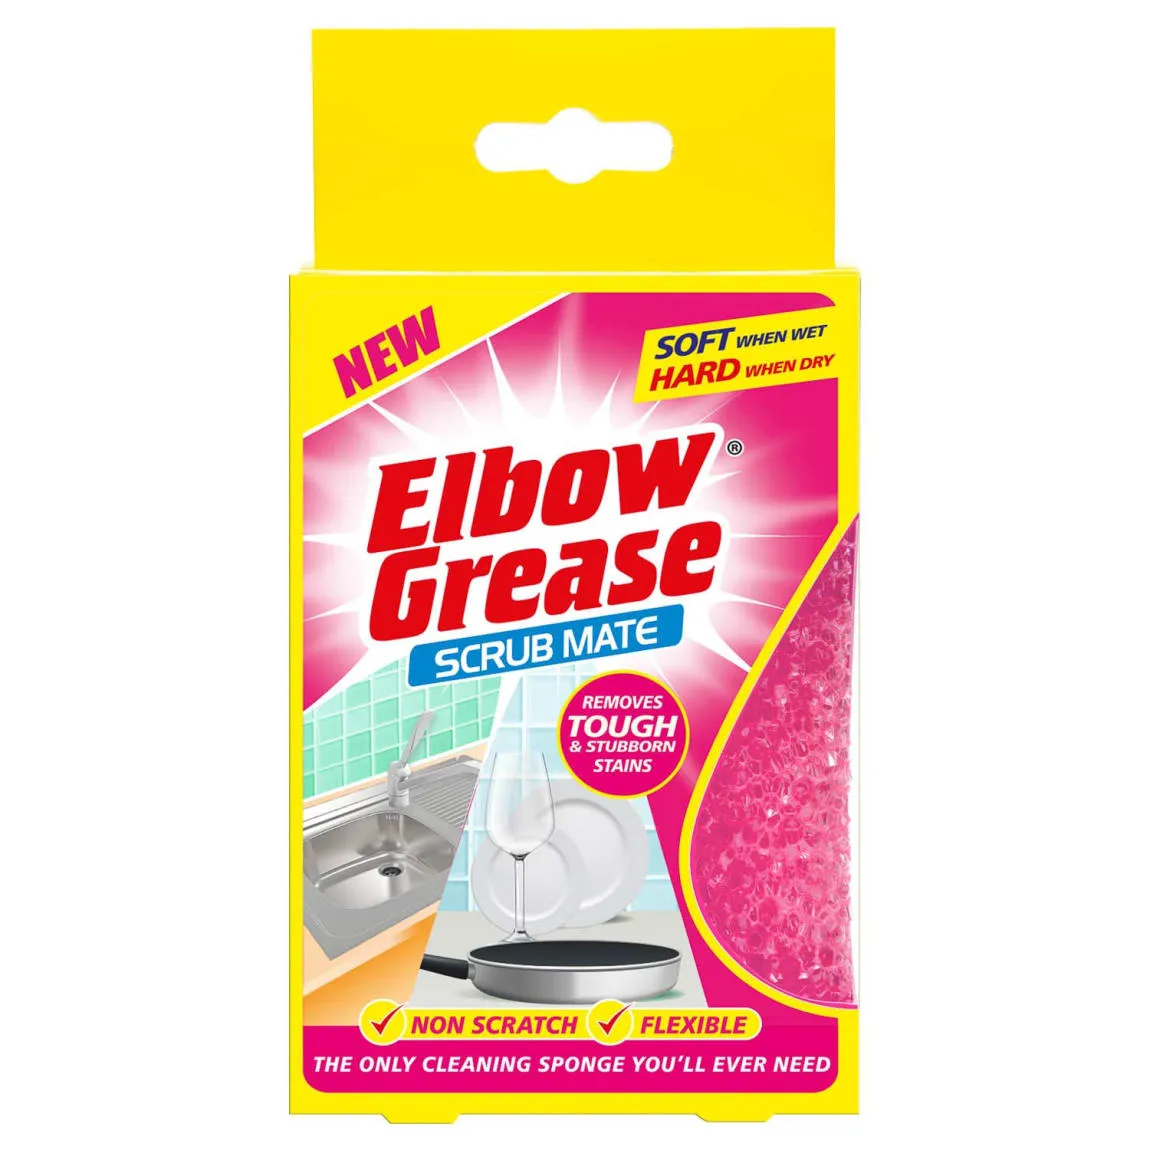 Scrub Daddy competitor - The Scrub Mate from Elbow Grease